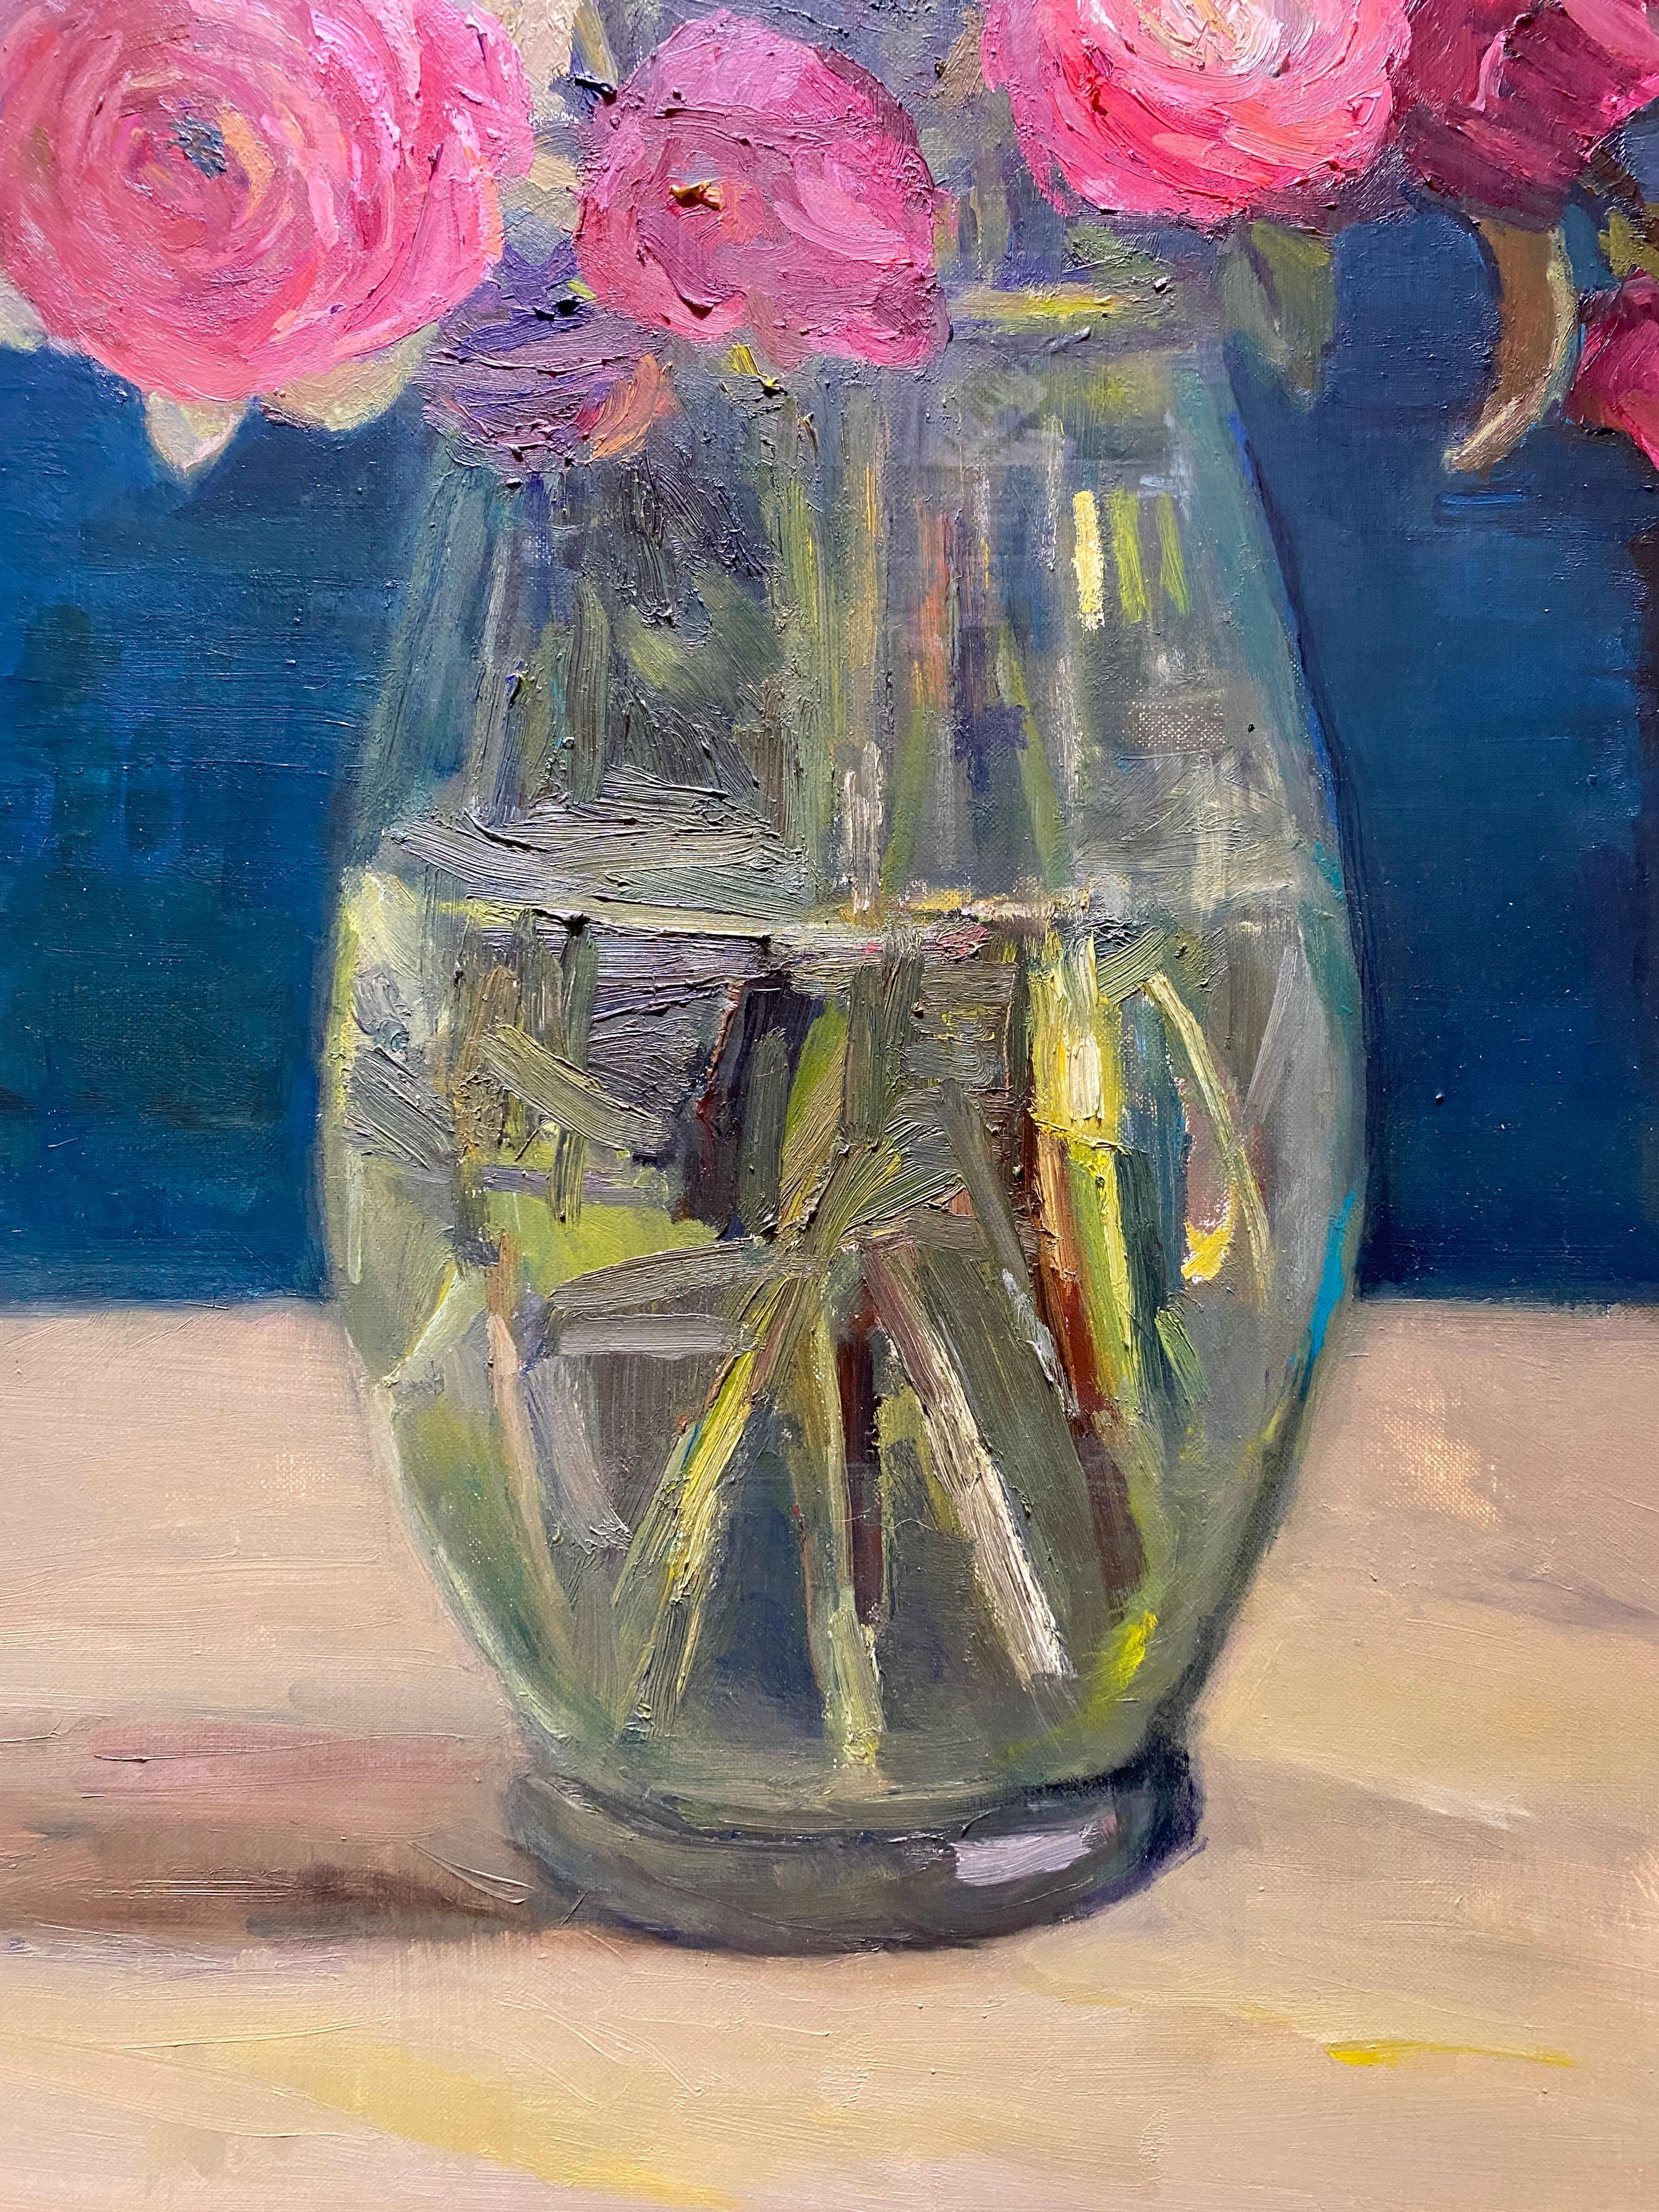 A bright and cheery depiction of a bouquet of colorful and varied flowers. 

Artist Bio 
Maryann Lucas lives and works in Sag Harbor. She is primarily self-taught but has also received instruction and support from wonderful and generous members of